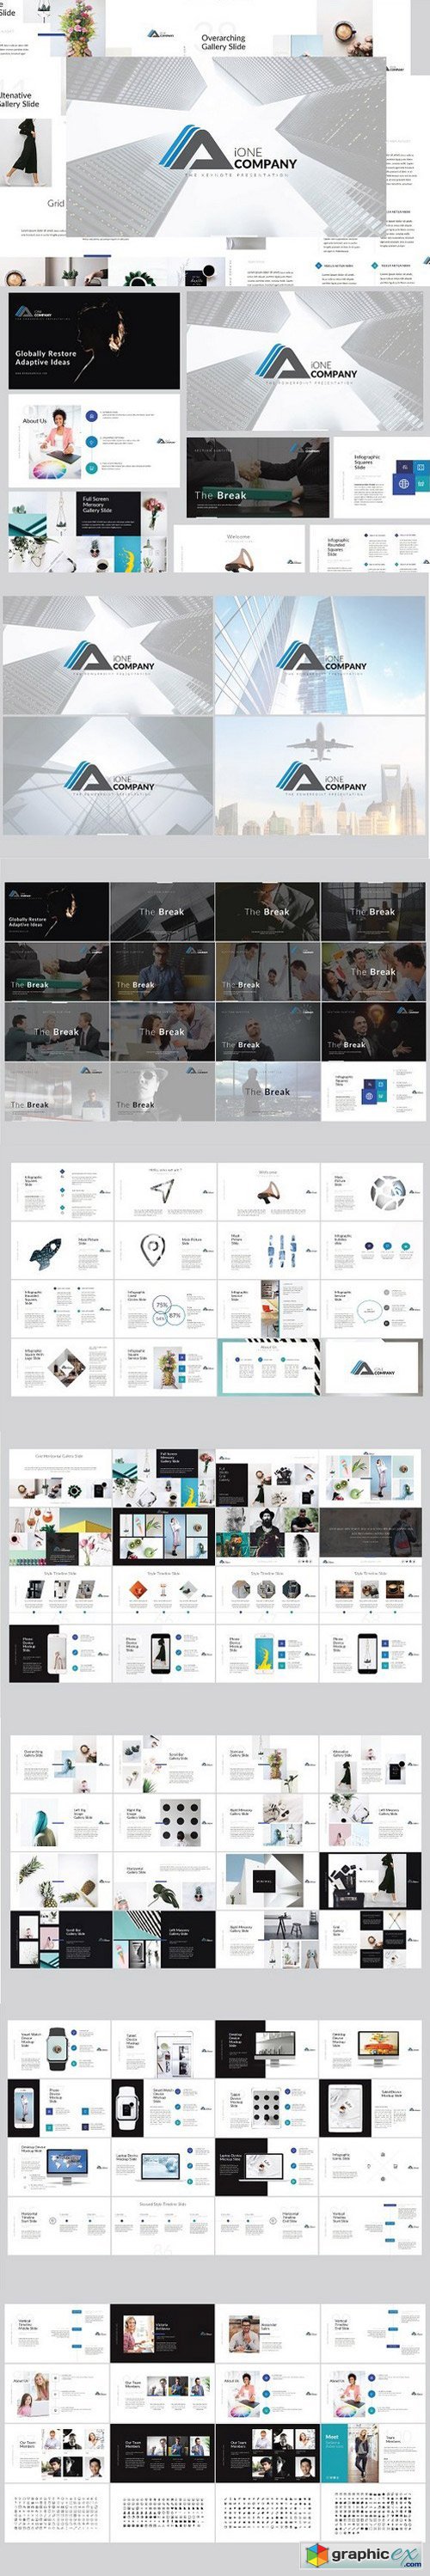 iOne Business Keynote Template